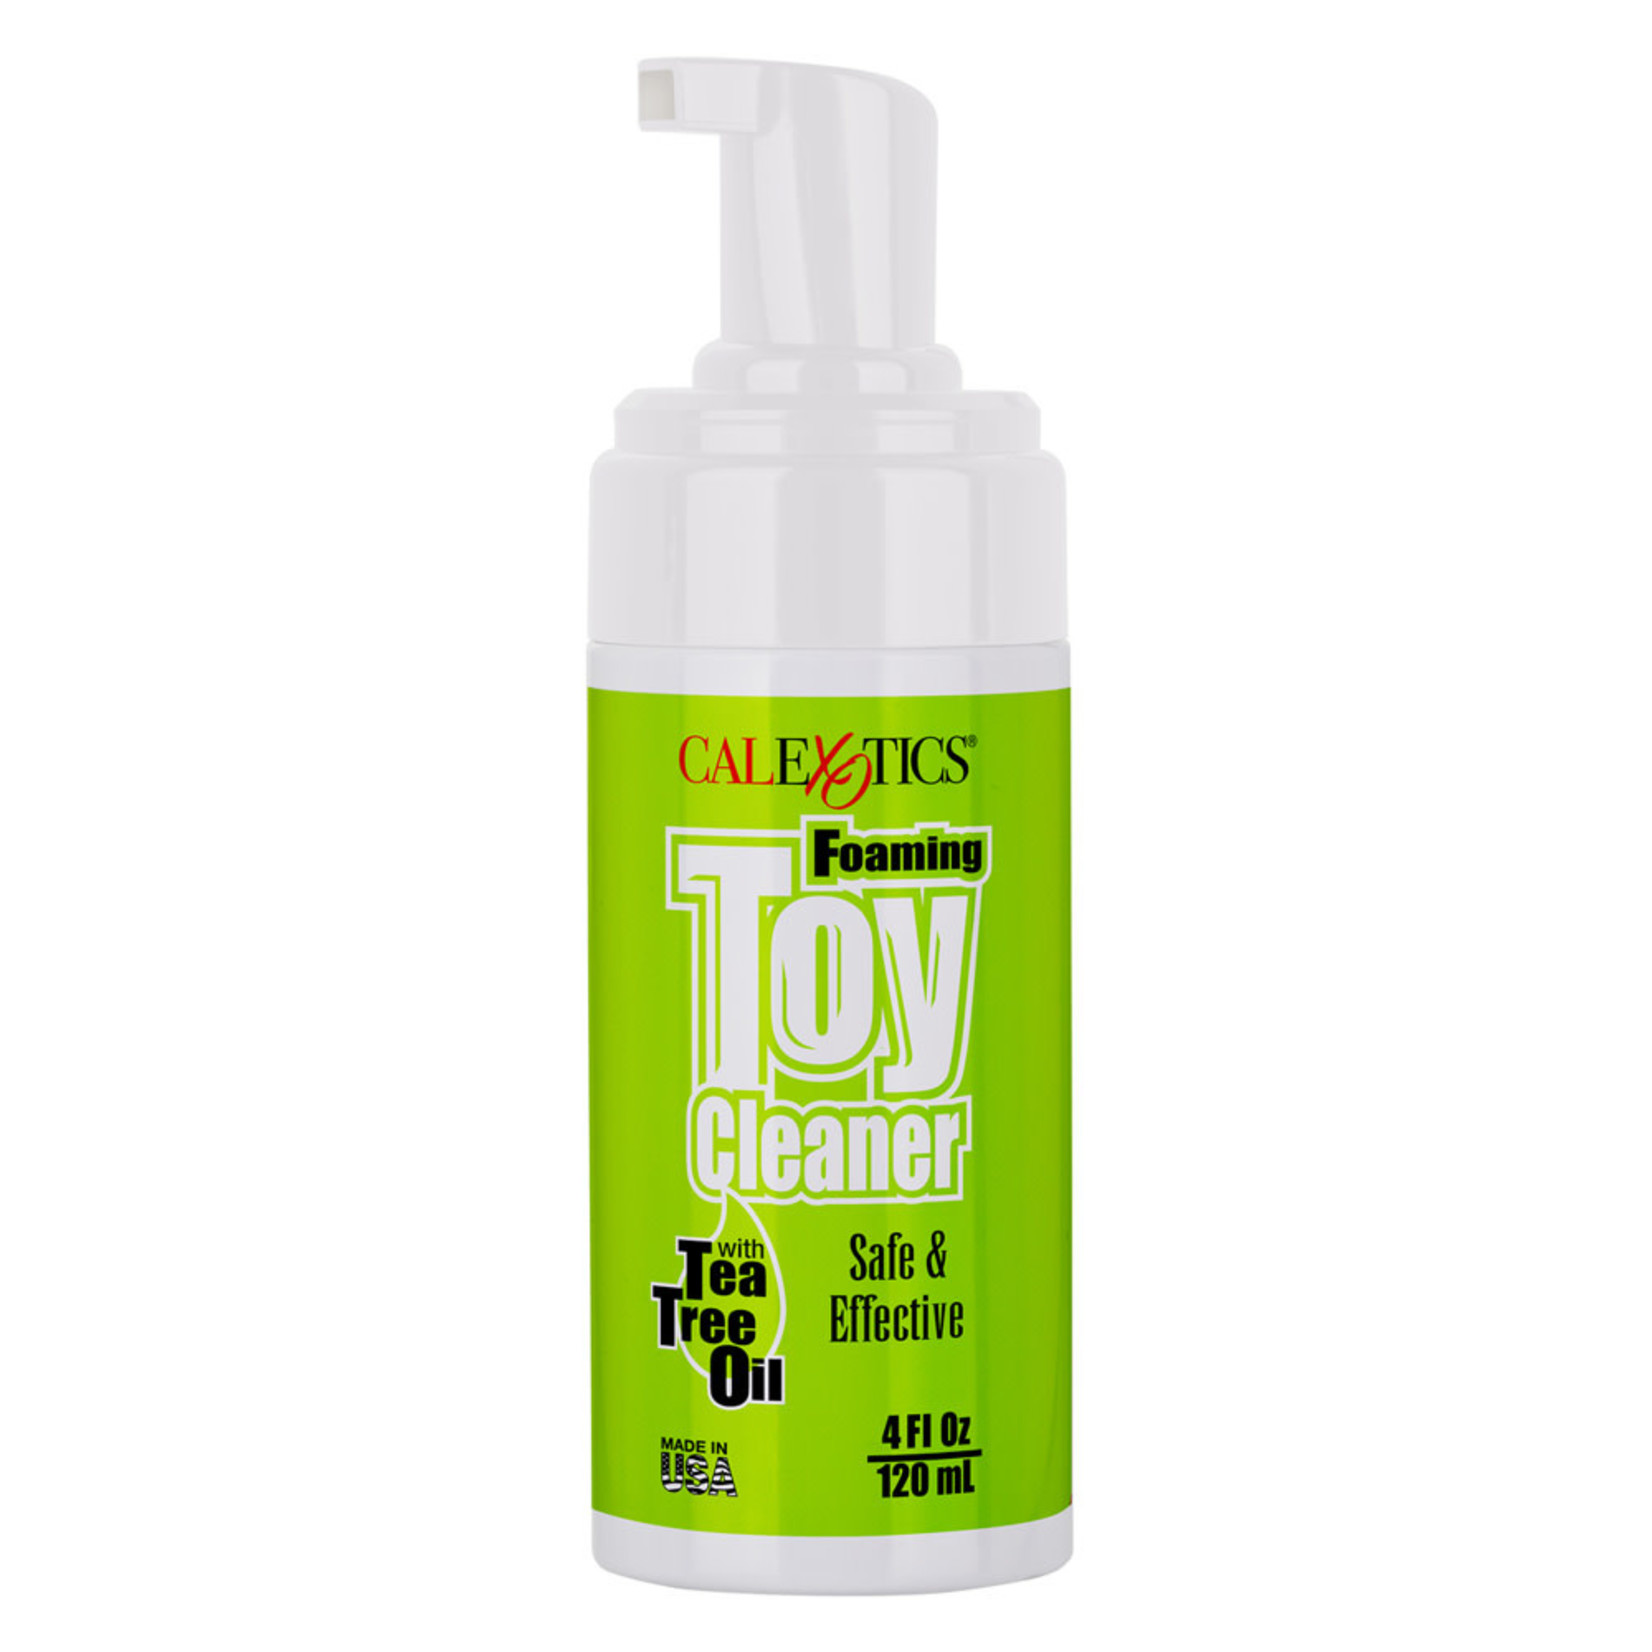 CALEXOTICS FOAMING TOY CLEANER WITH TEA TREE OIL - 4 FL. OZ.